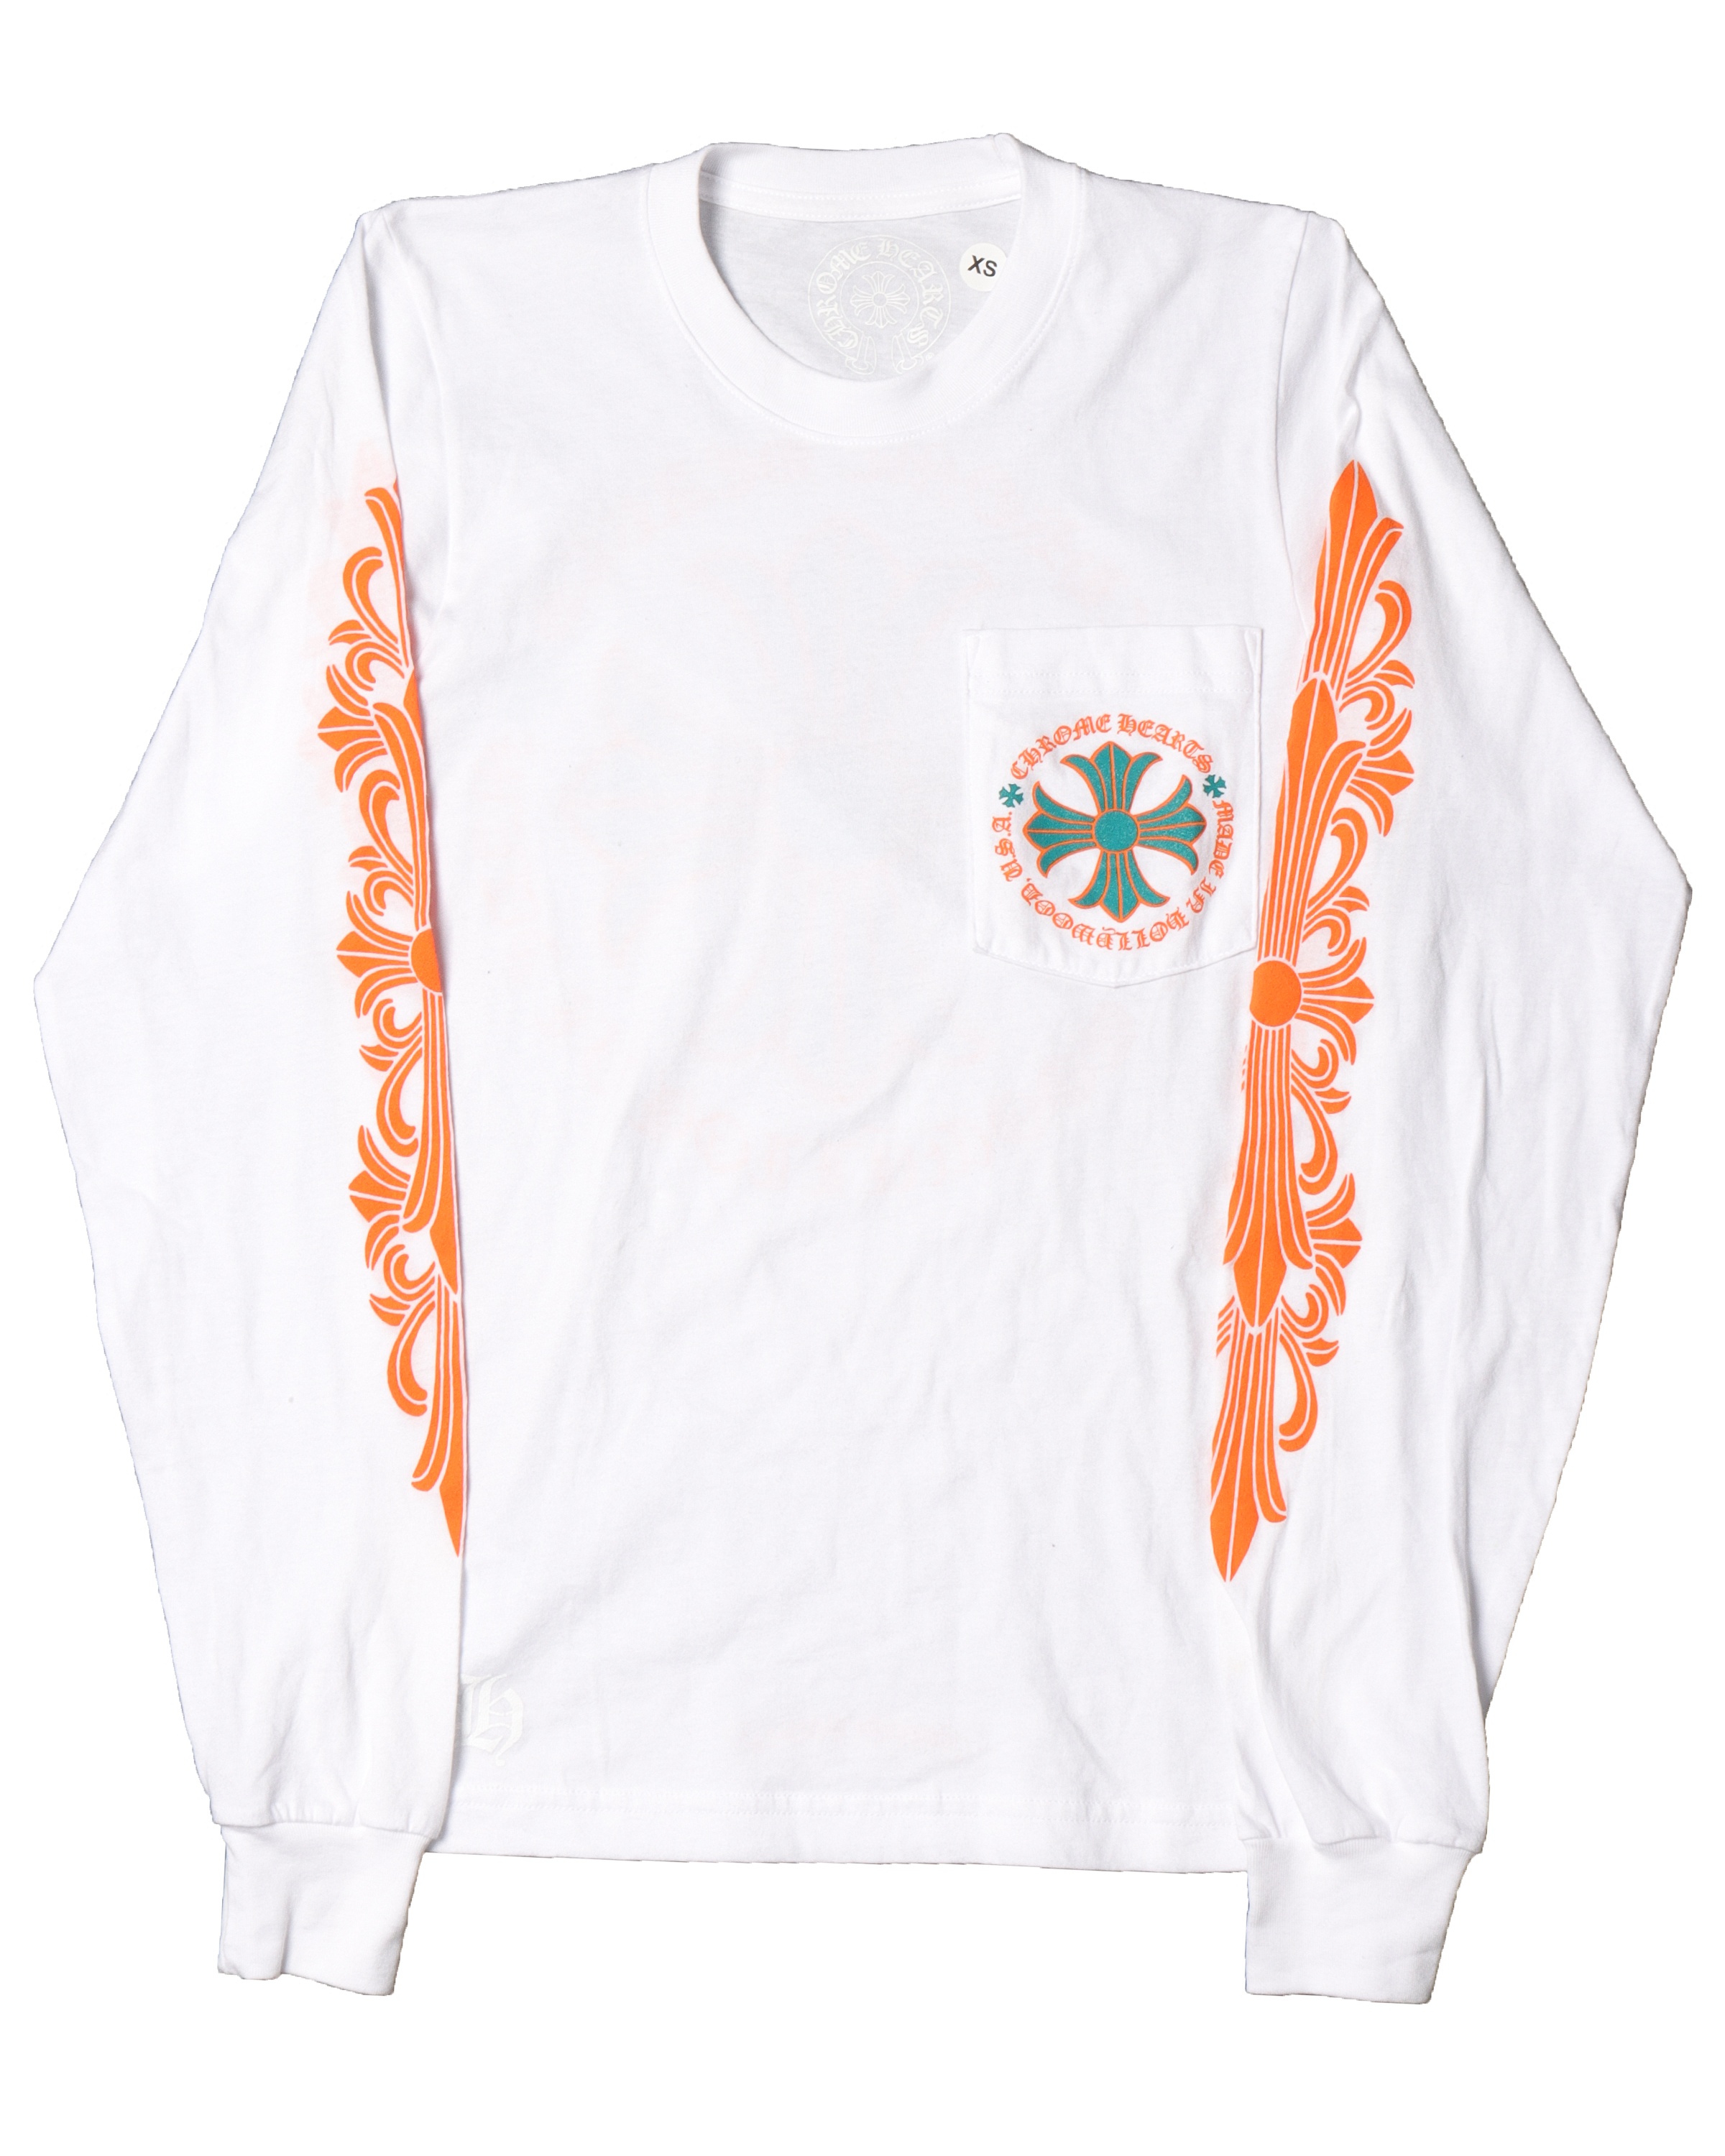 Chrome Hearts Miami Exclusive Long Sleeve T-Shirt